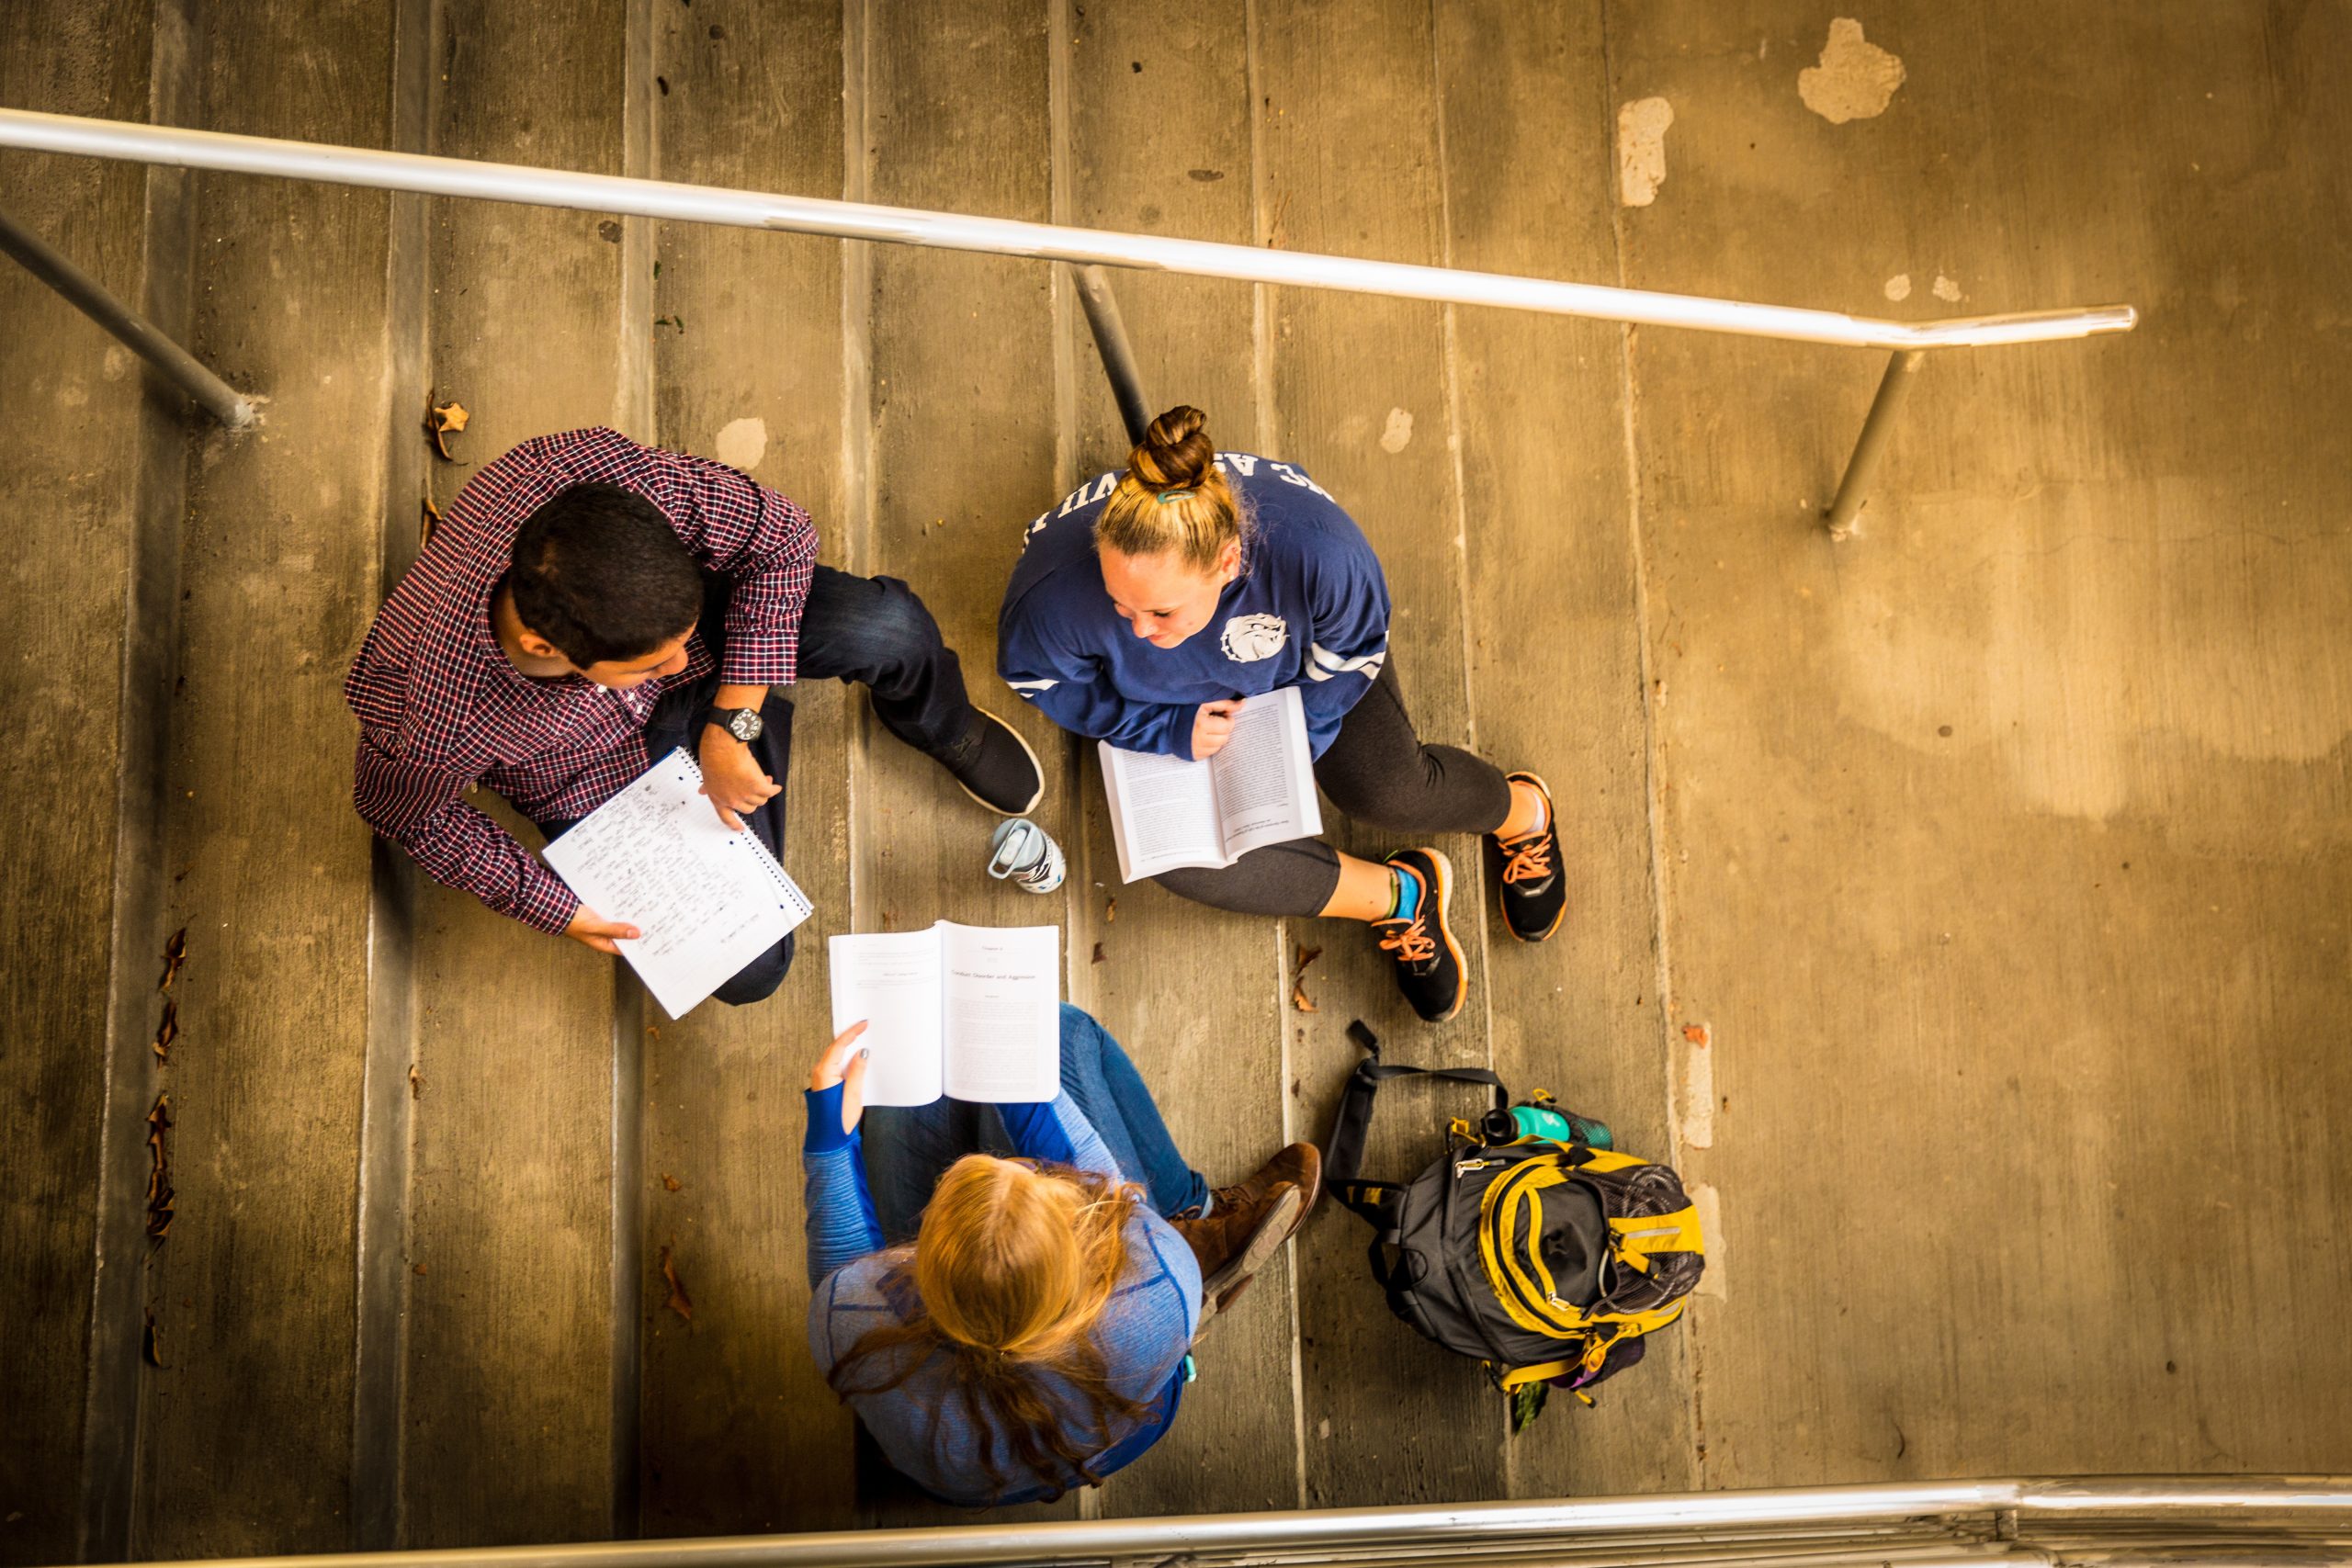 Aerial shot of students studying together